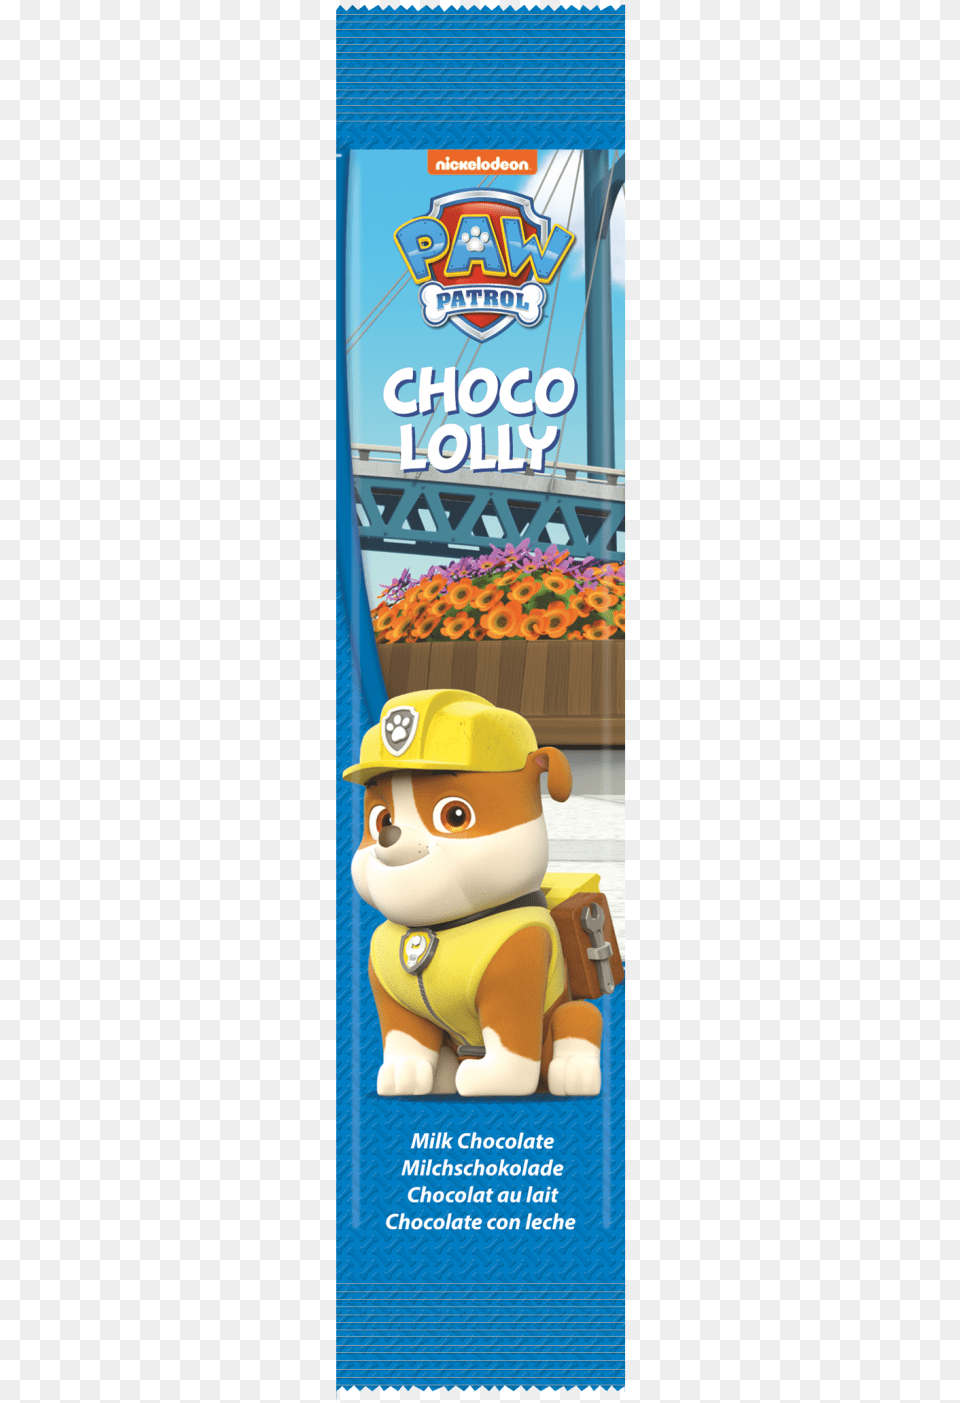 Paw Patrol Choco Lolly Rubble Download Mascot, Toy, Advertisement, Poster, Helmet Png Image